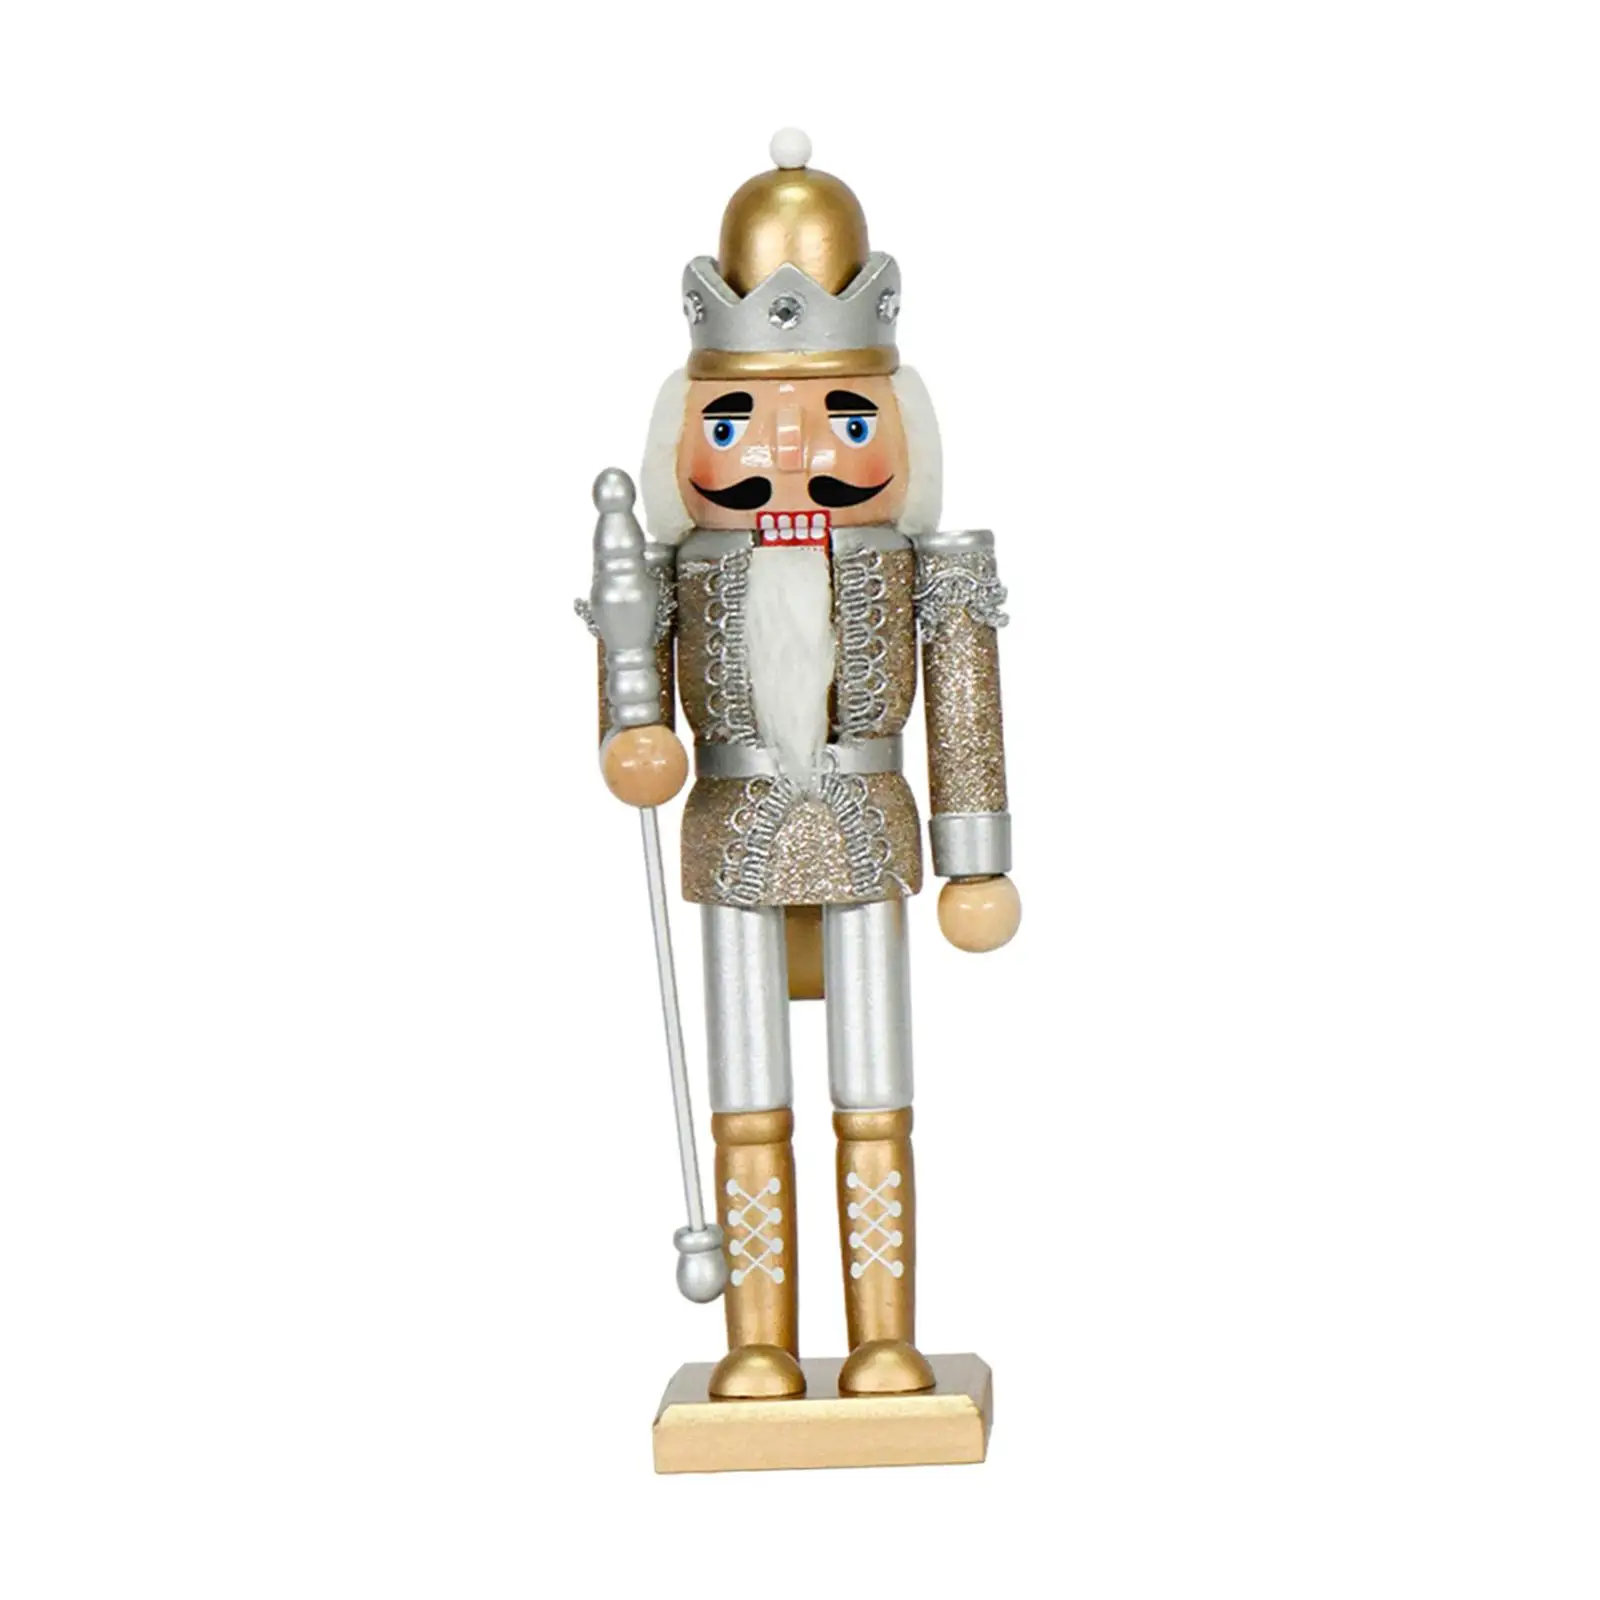 

Christmas Decoration Collectible Free Standing 12" Christmas Nutcracker Soldier for Festive Bedroom Home Birthday Scene Layout